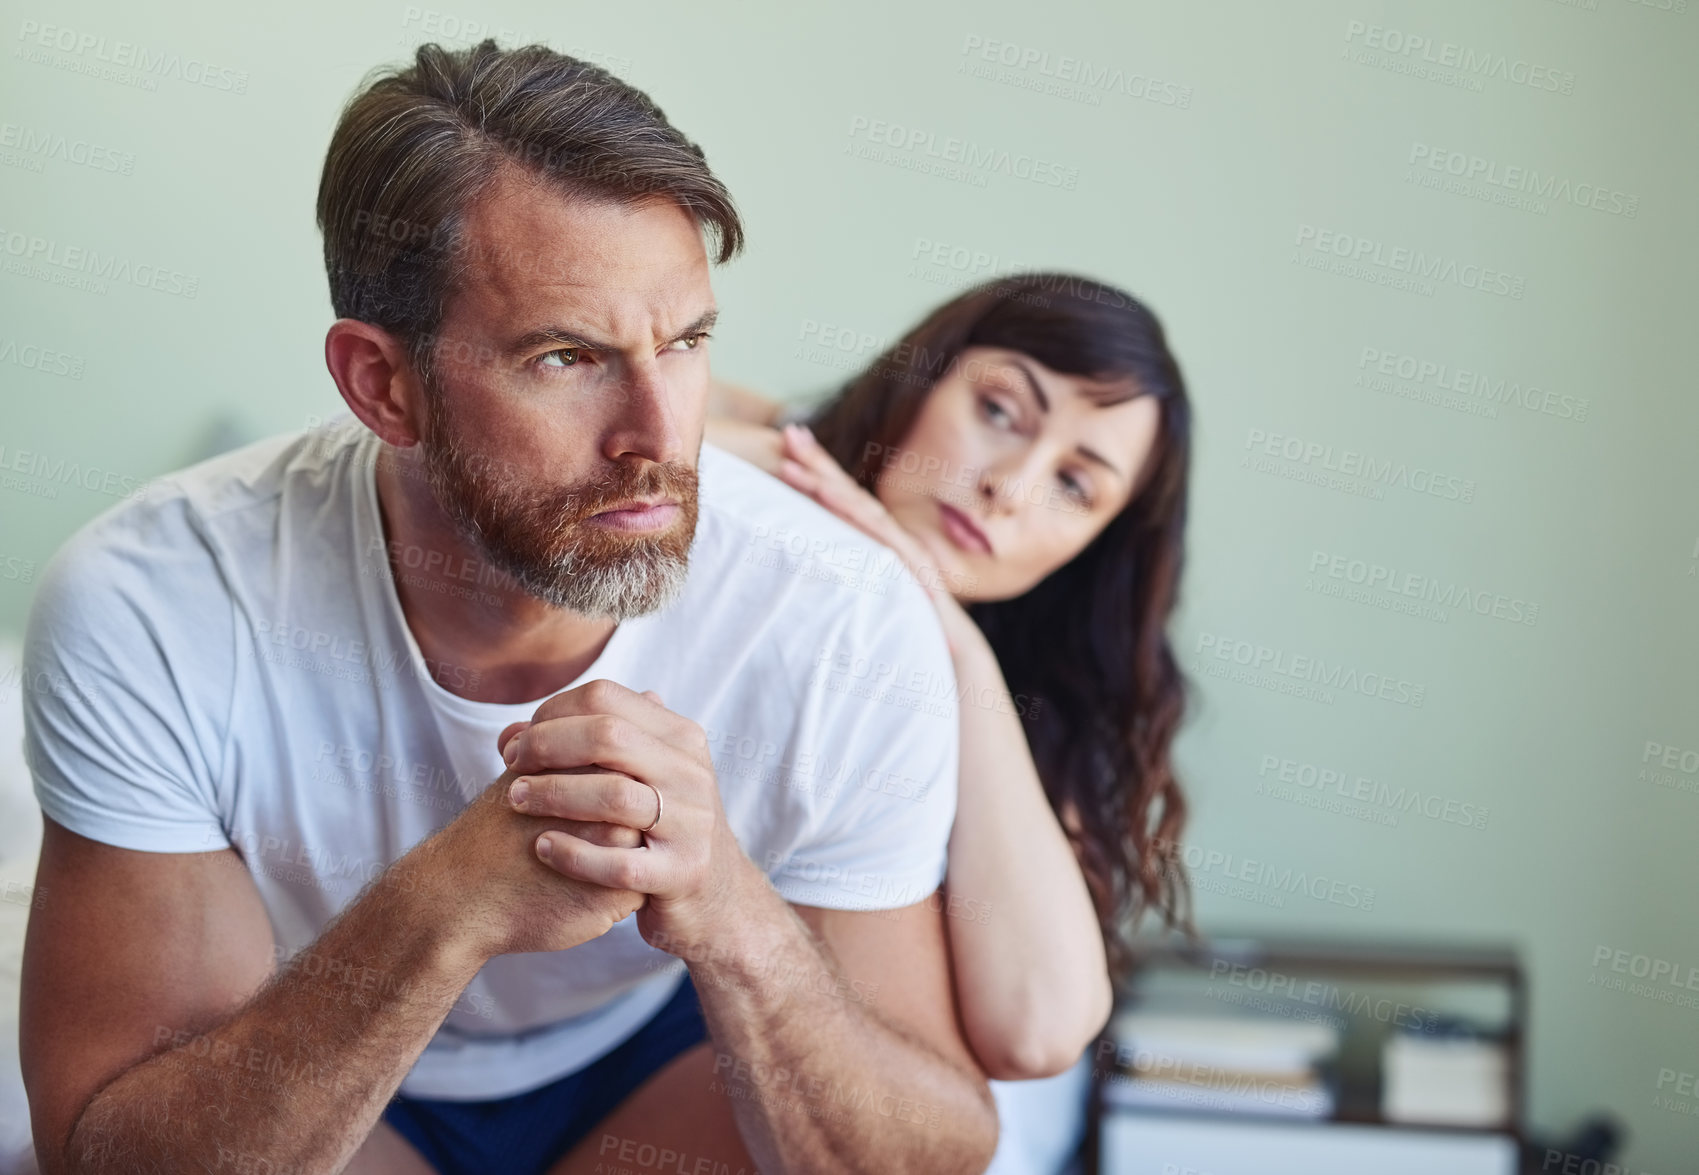 Buy stock photo Shot of a unhappy looking middle aged man looking into the distance while his partner tries to comfort him in the bedroom